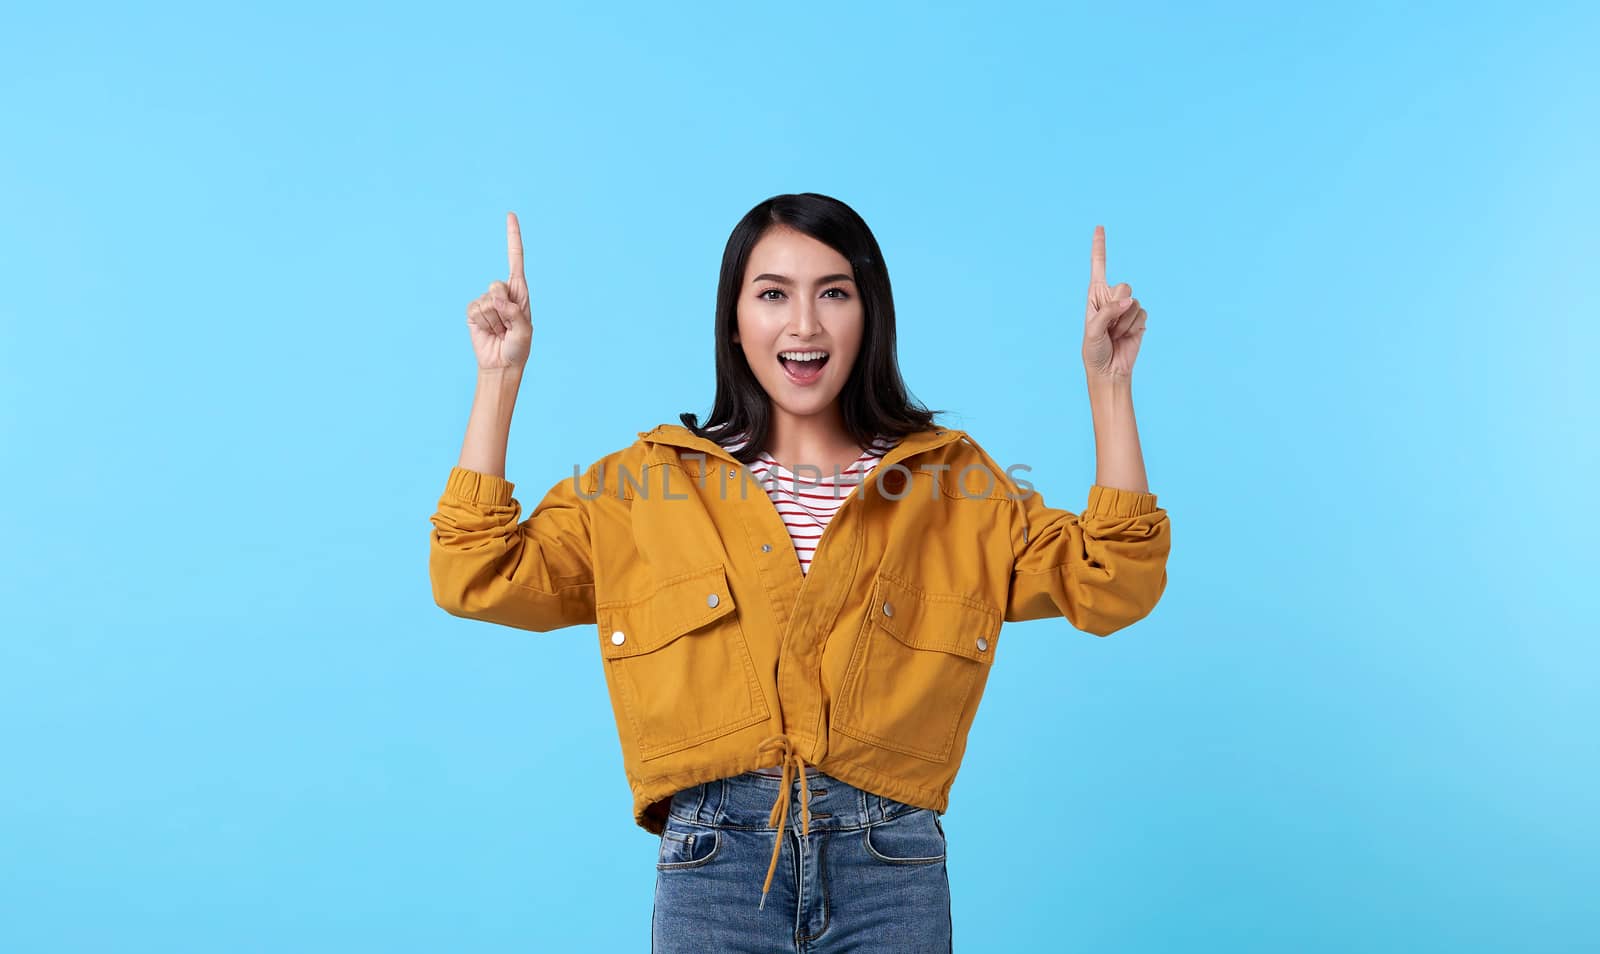 Smiling happy asian woman with her finger pointing isolated on light blue banner background with copy space.